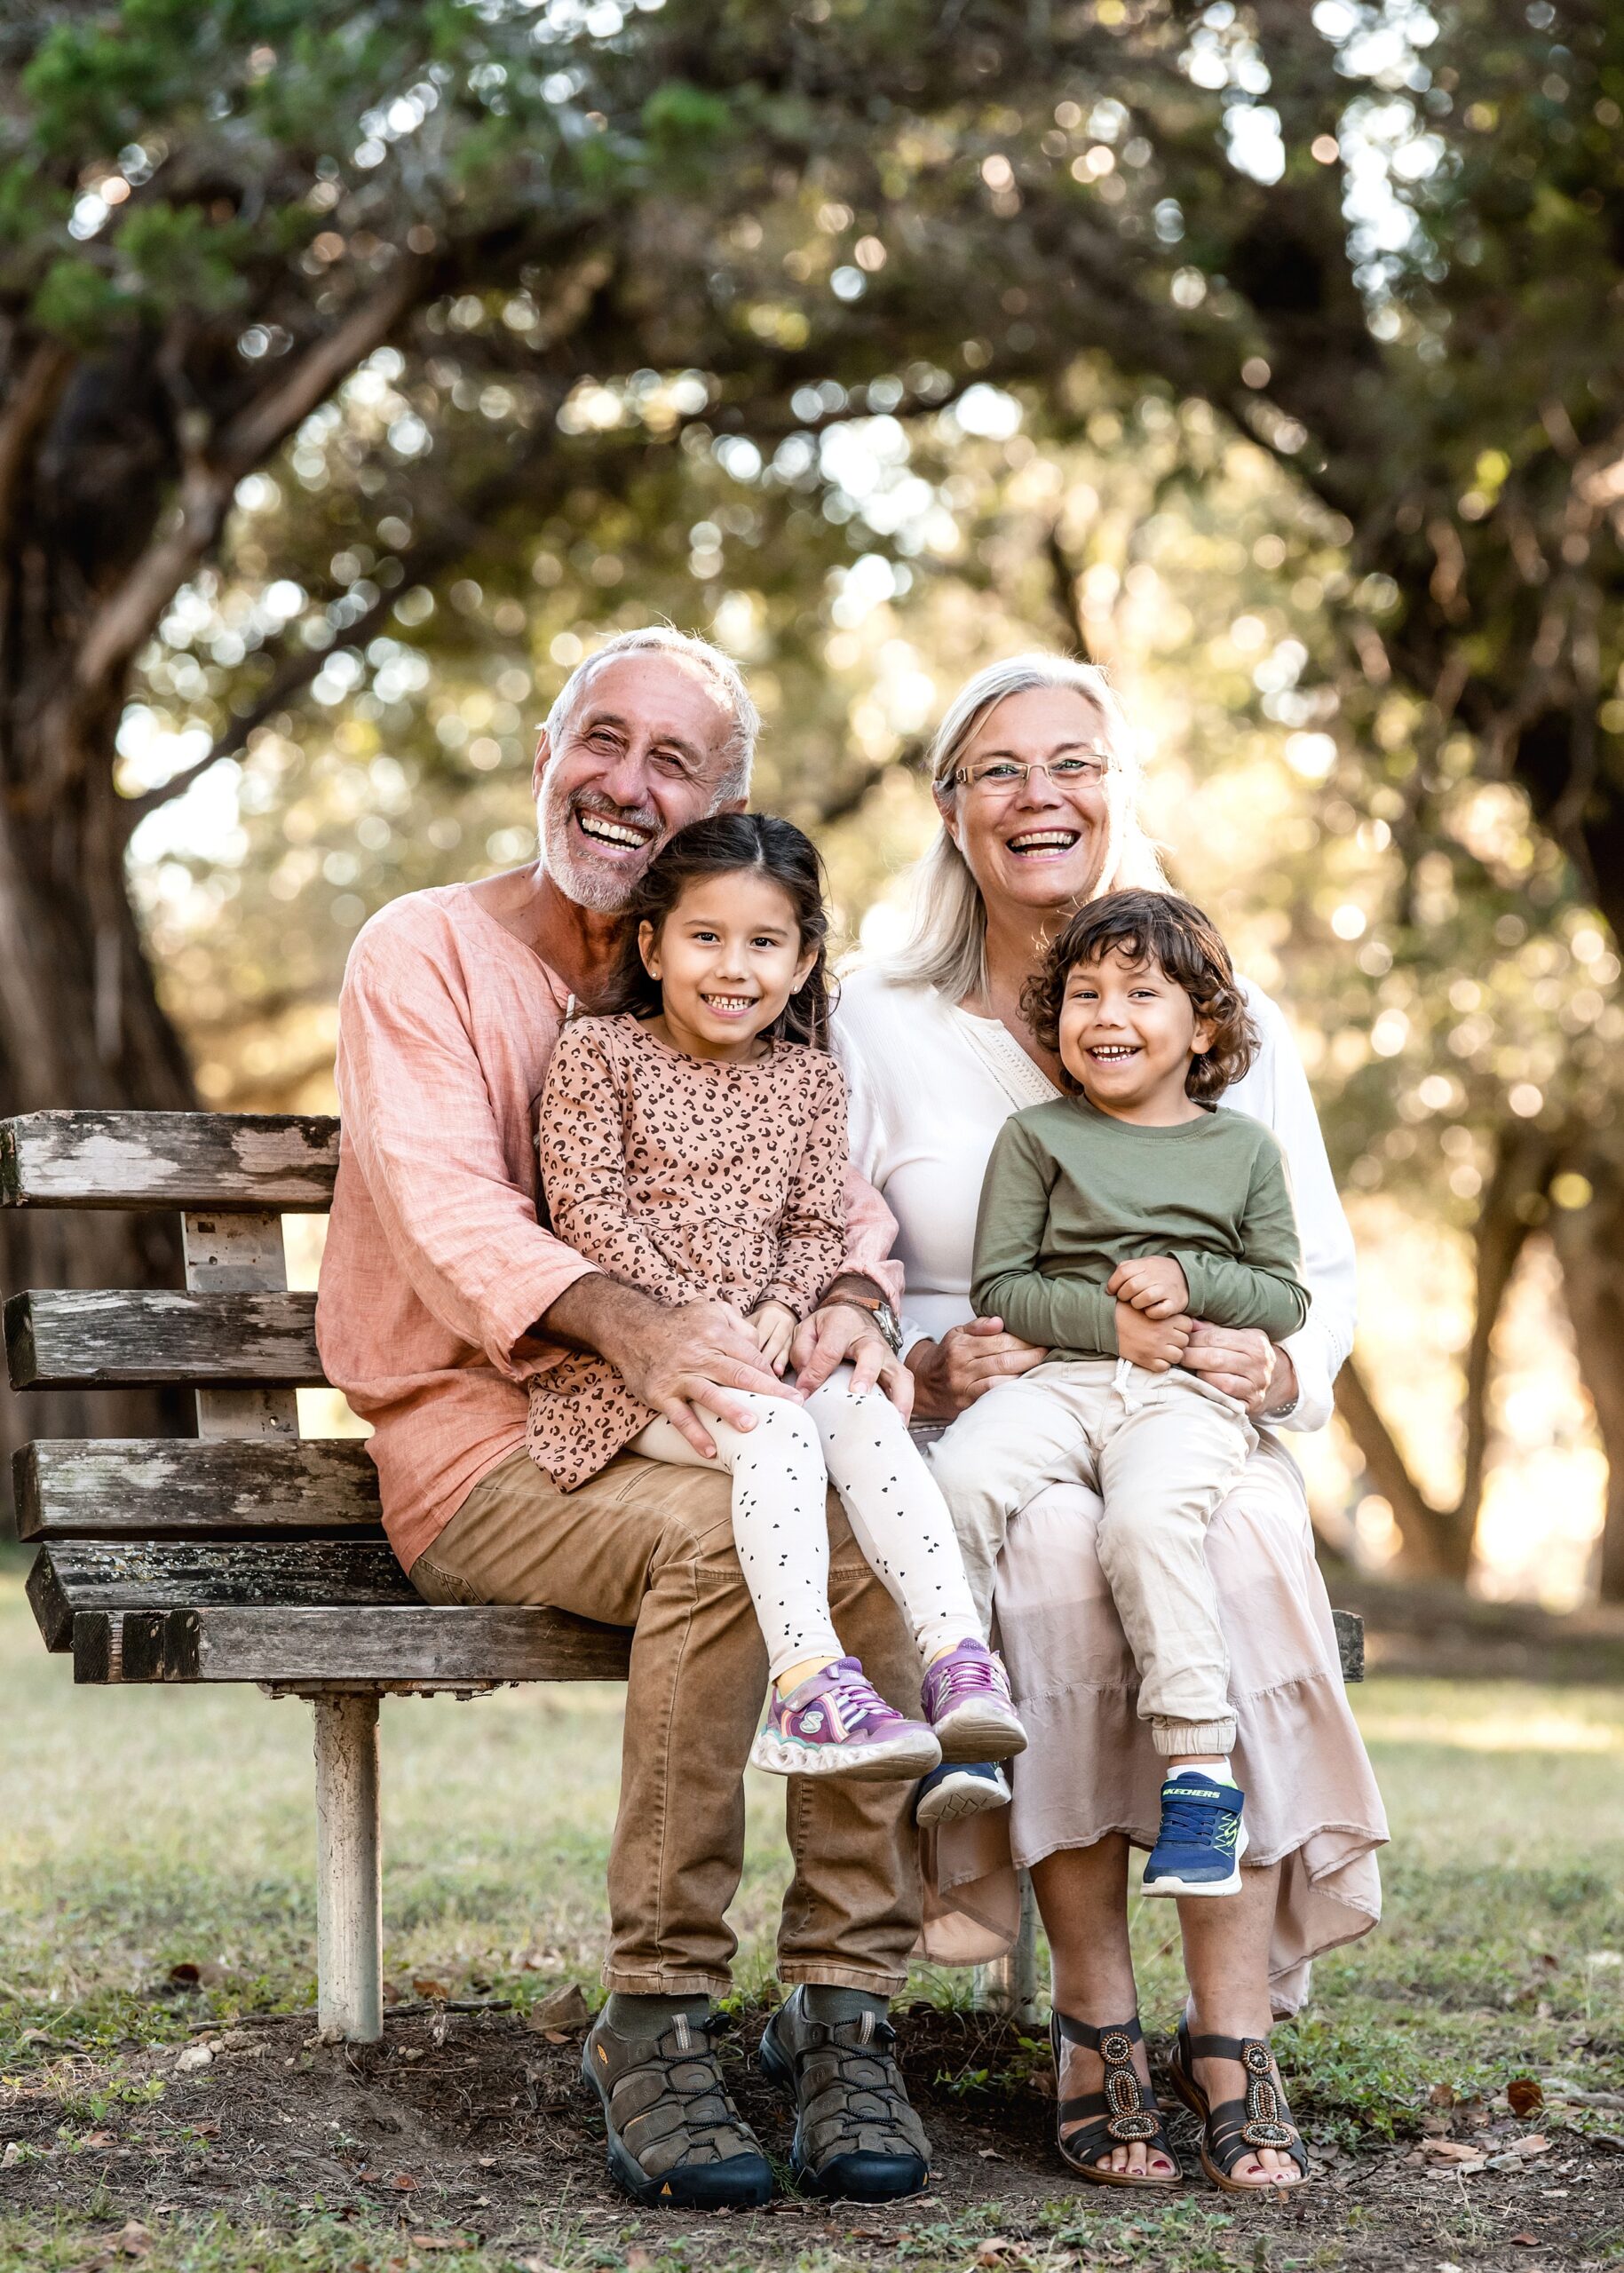 Grandma and Grandpa sit on a wooden park bench with their two grandchildren in their laps